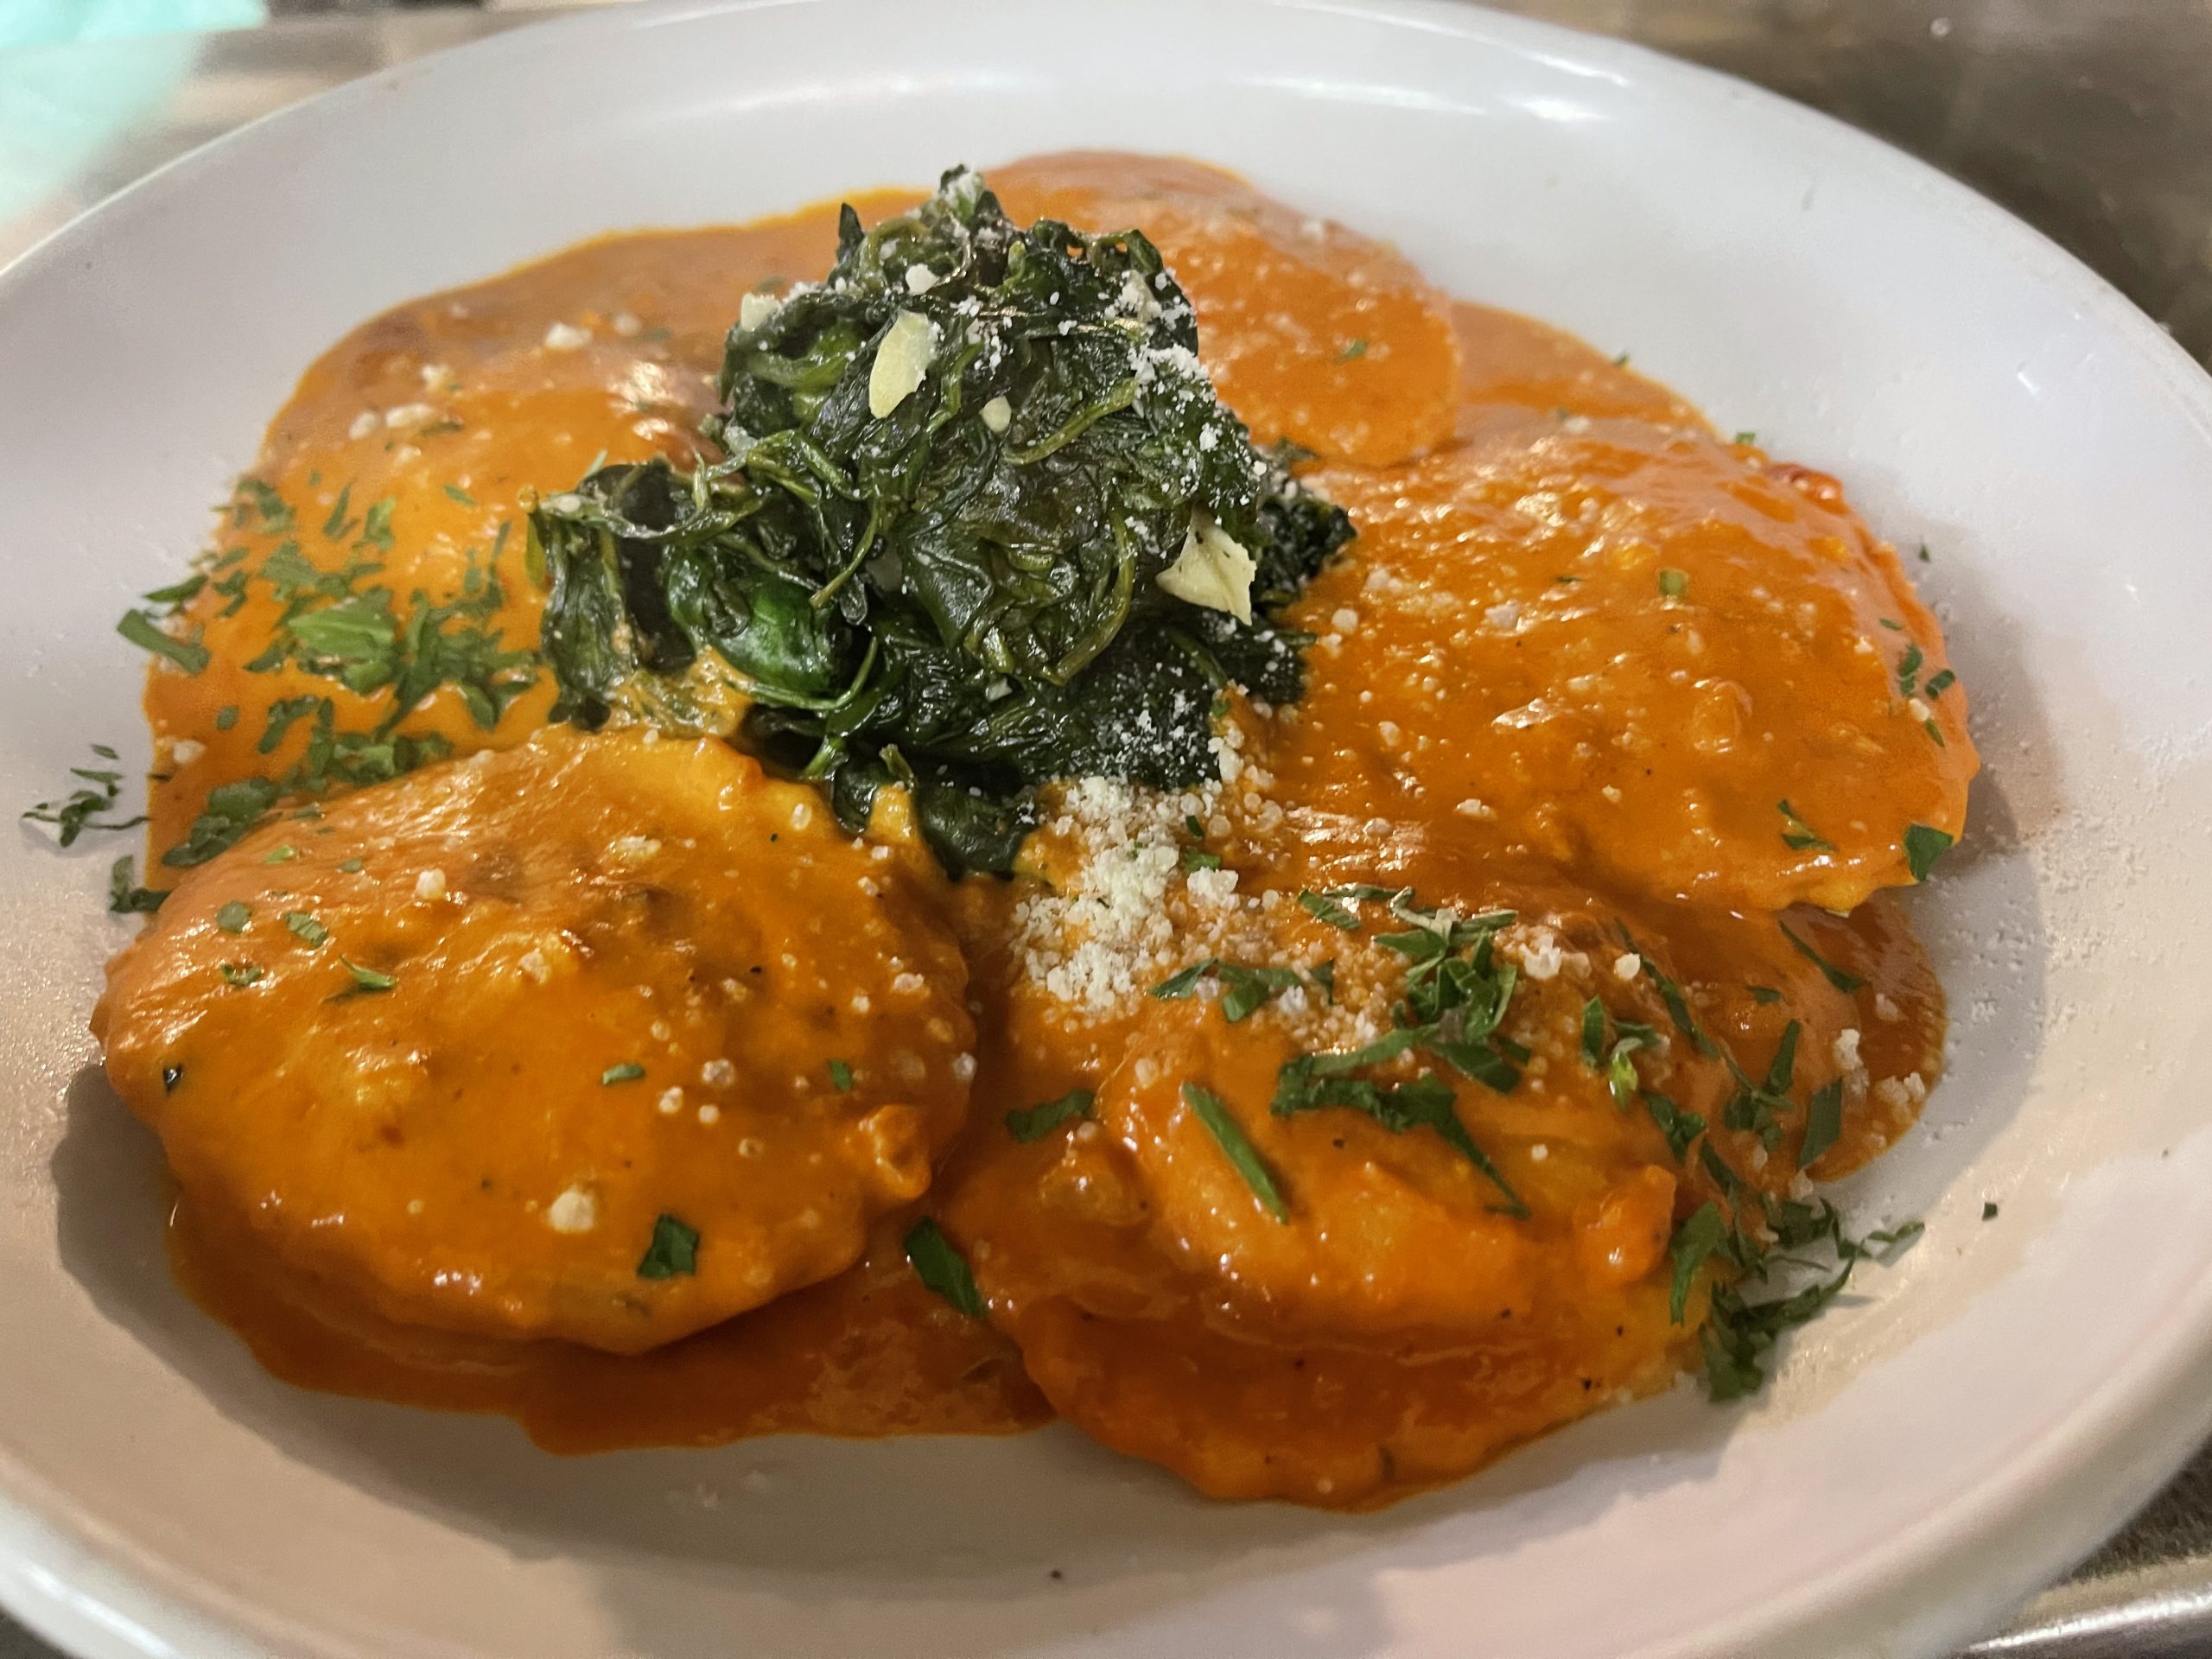 A plate of ravioli with spinach and parmesan.